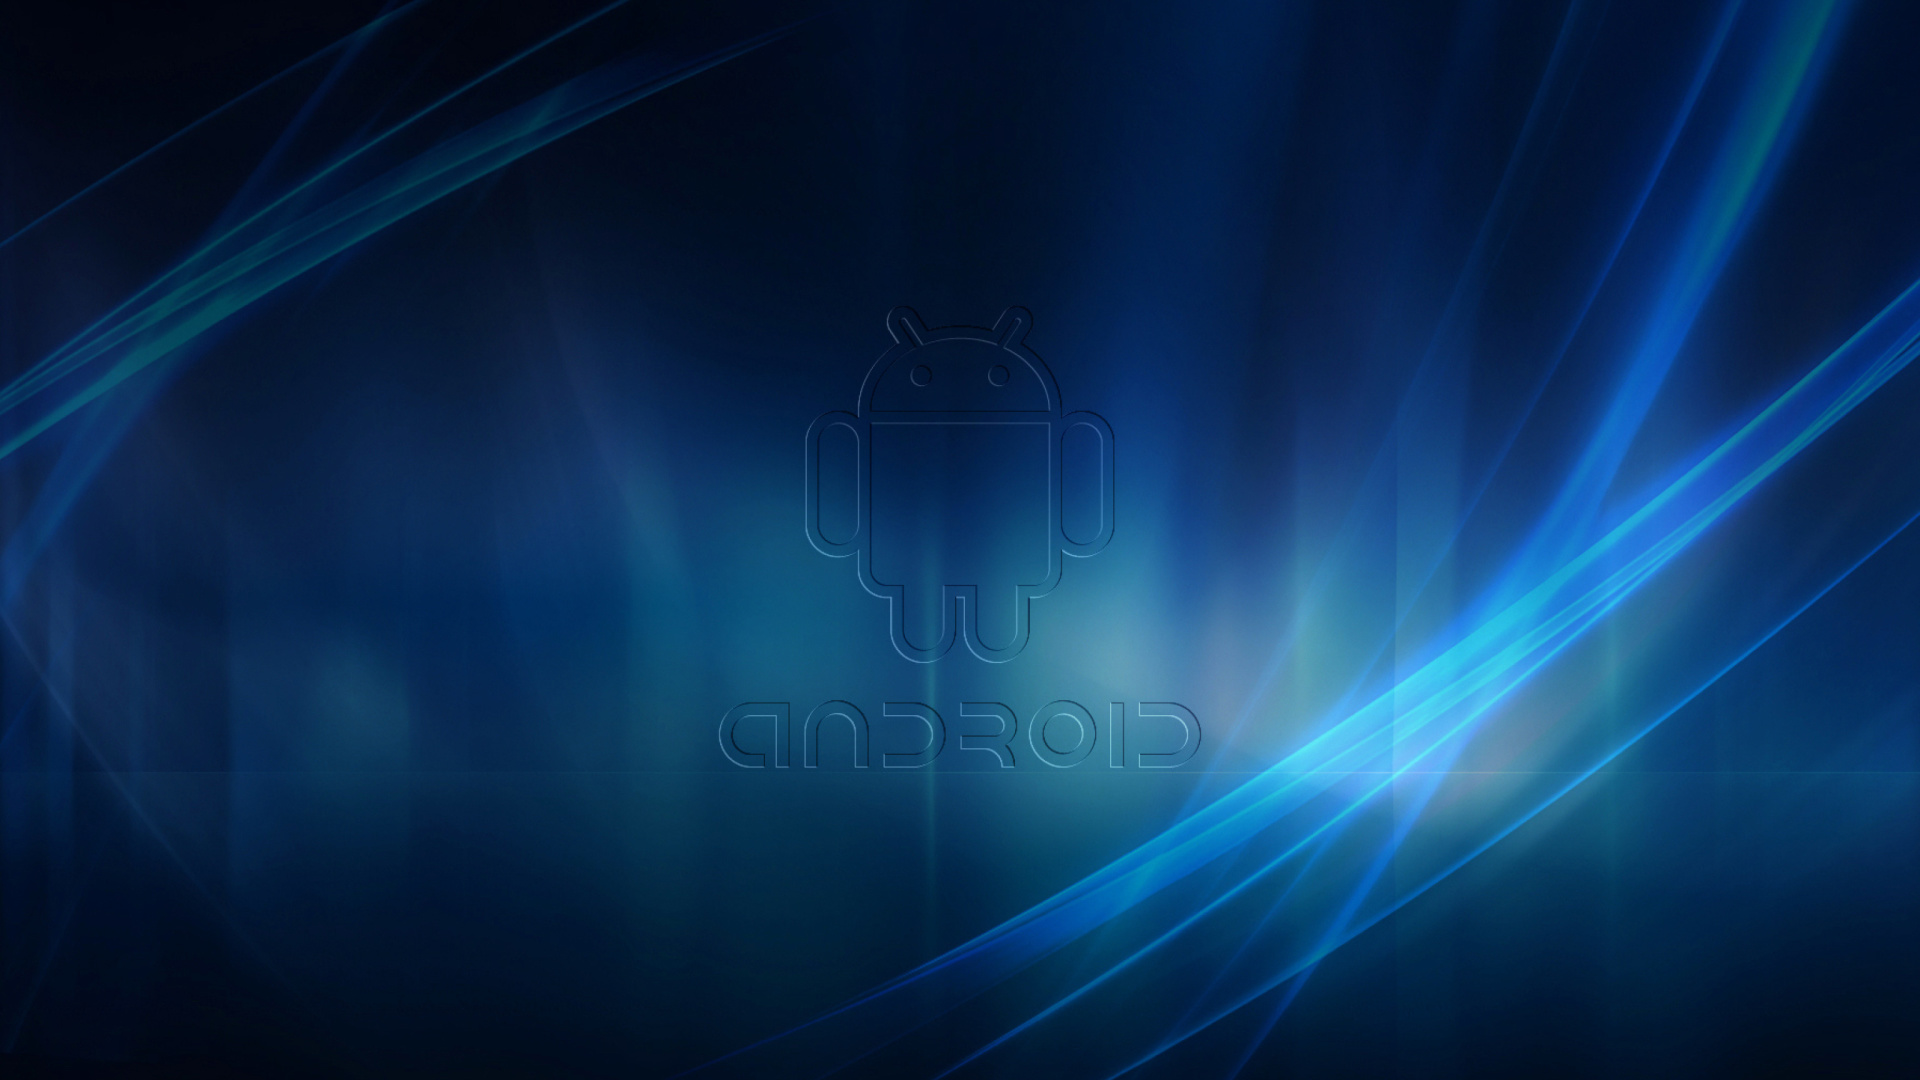 Android Robot wallpaper 1920x1080